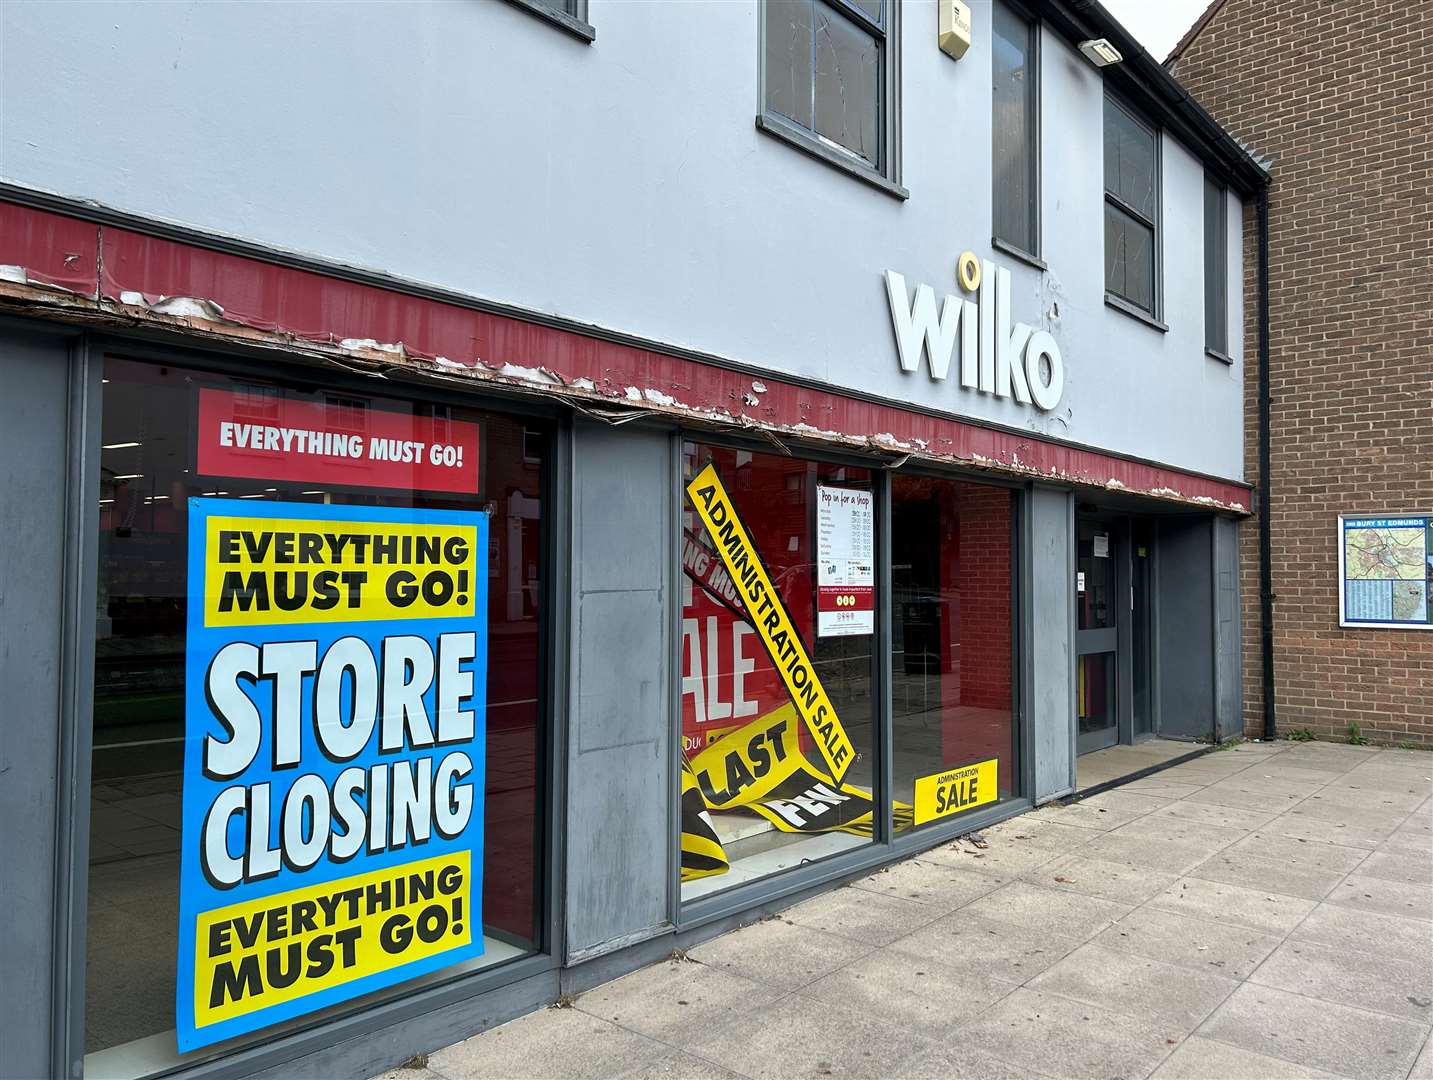 Wilko stores across the country are closing down. Picture: Camille Berriman